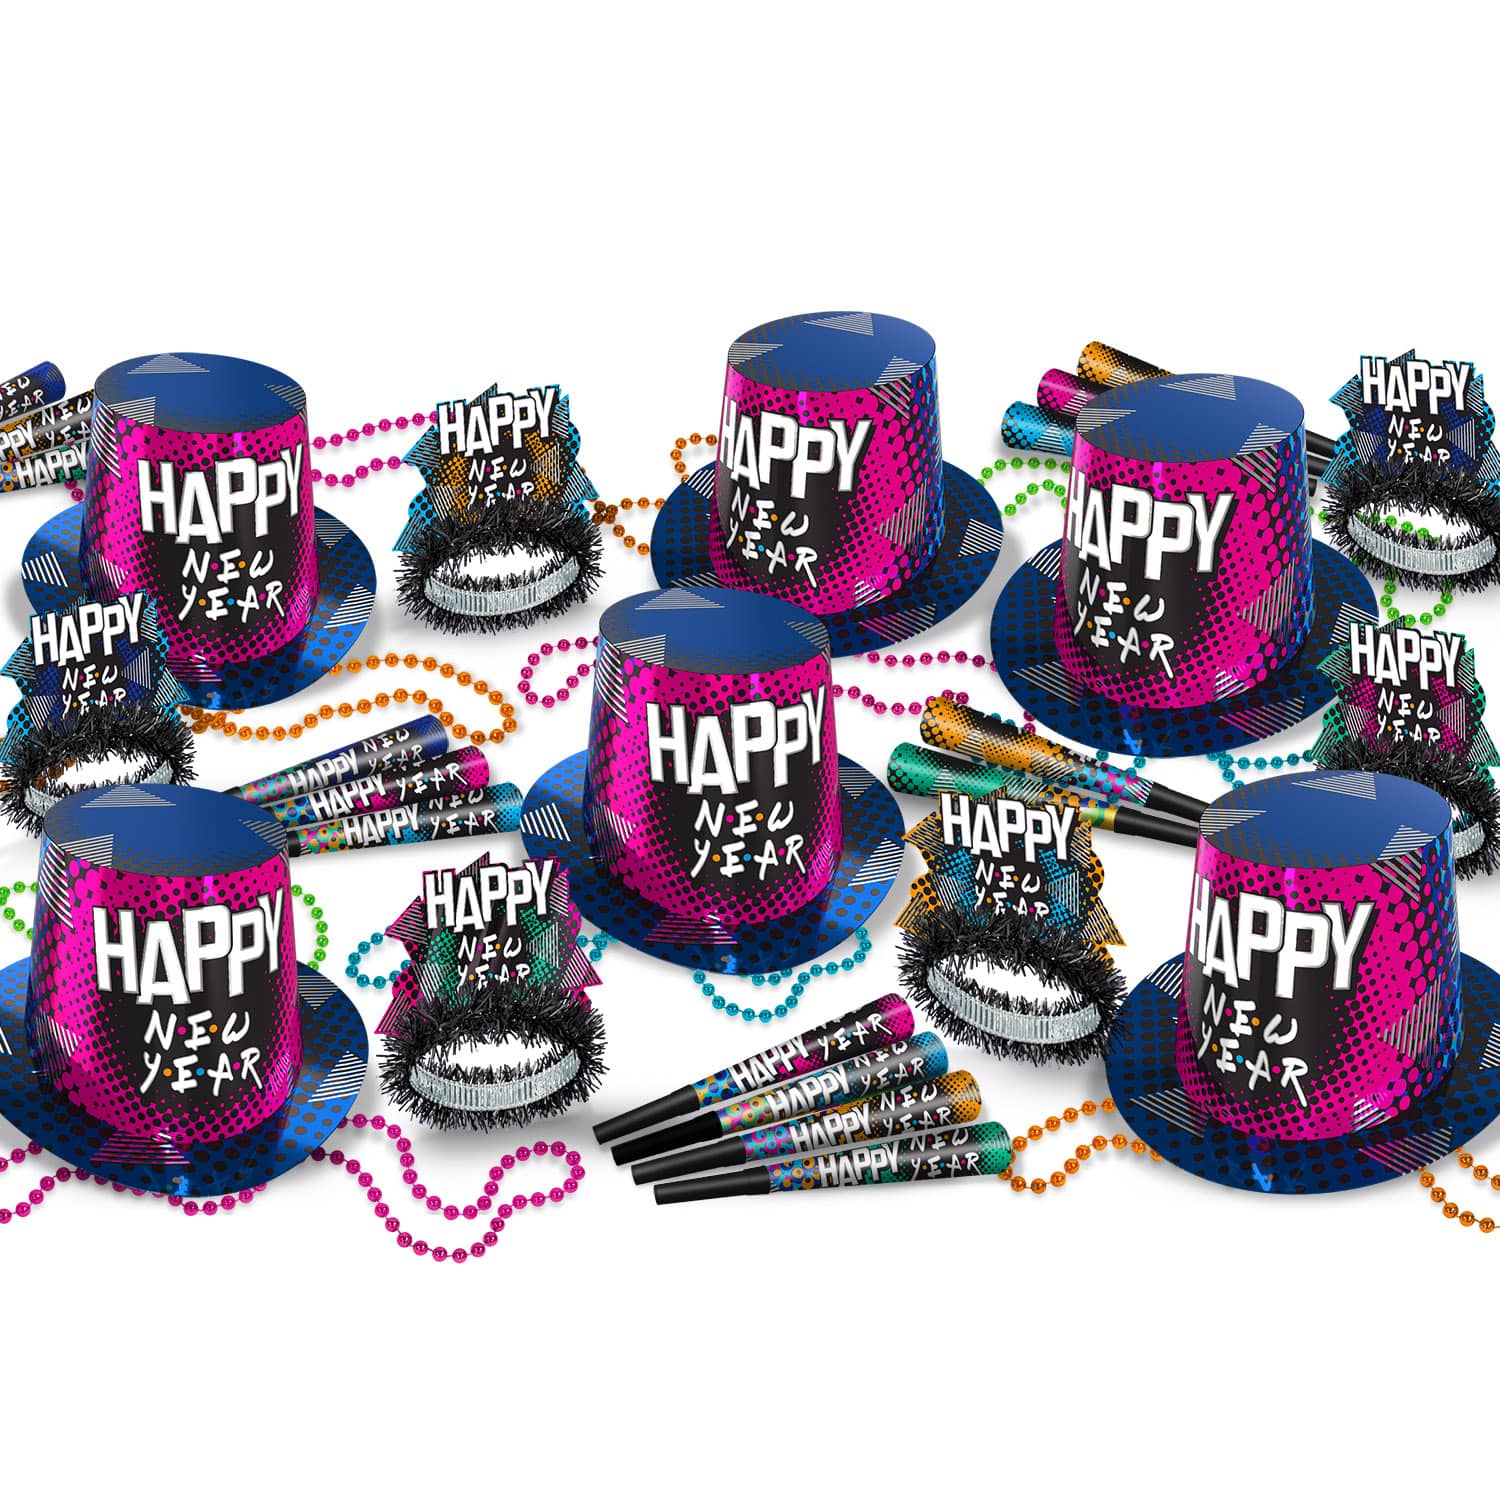 90s New Year Assortment for 50   90s New Year Assortment for 50, 2022, 90s, new years eve, party kit, hat, tiara, horn, bead, wholesale, inexpensive, bulk, party favor